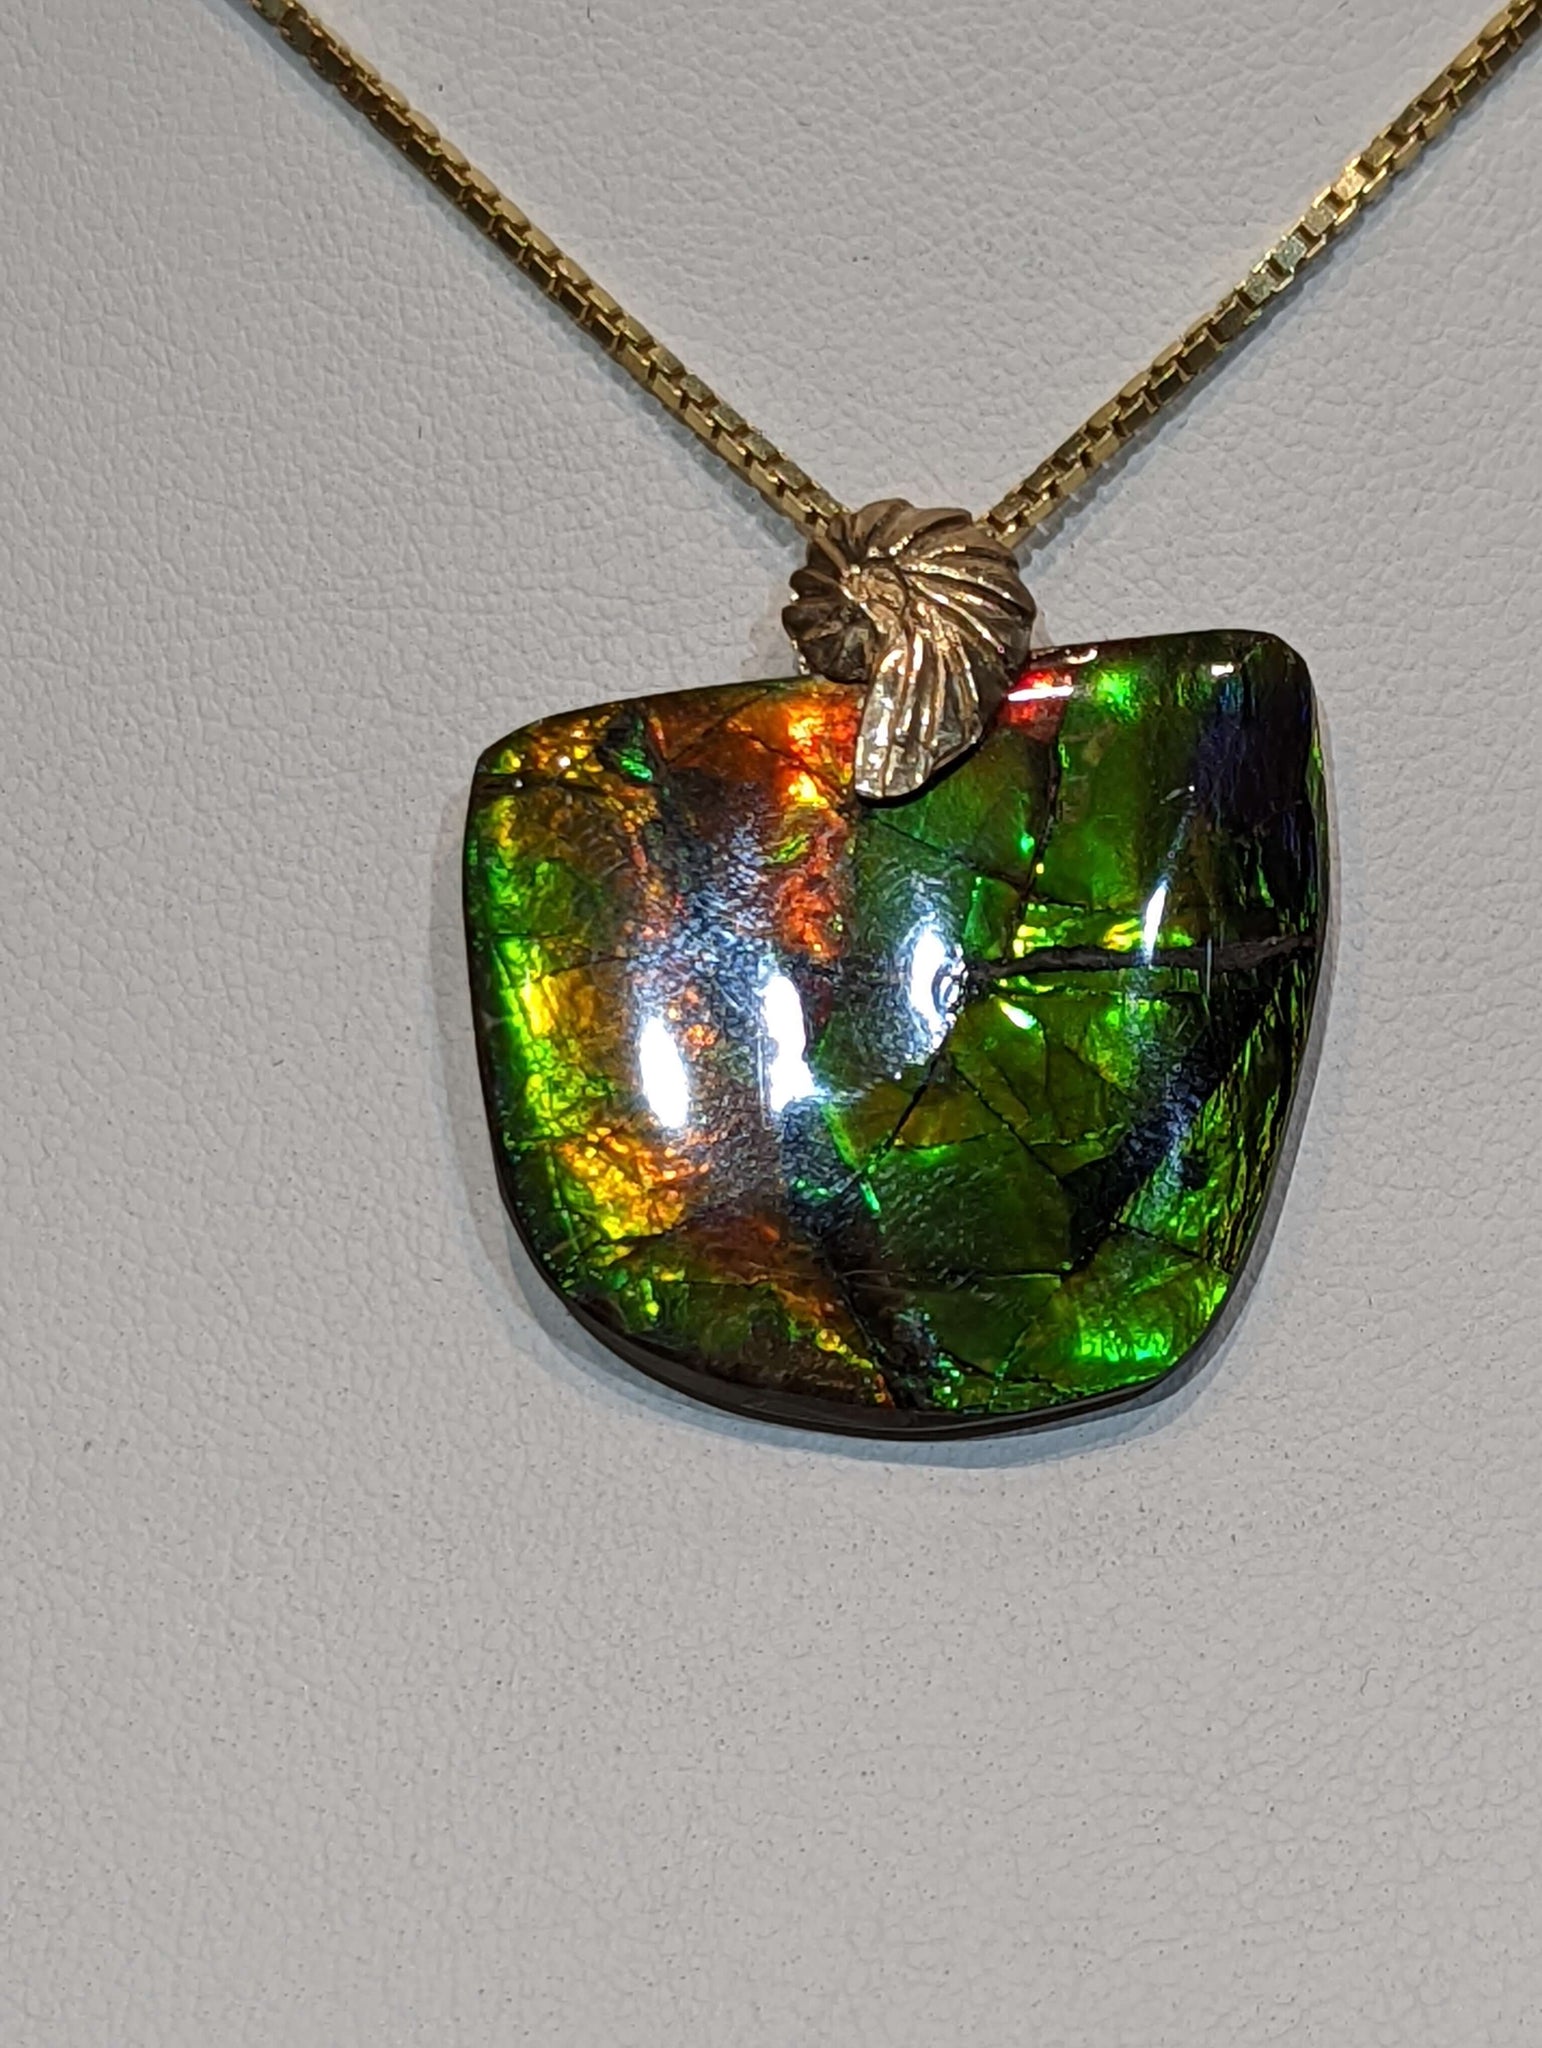 Ammolite Freeform Pendant that is 25x30mm PN E2123A %product from Empire Ammolite